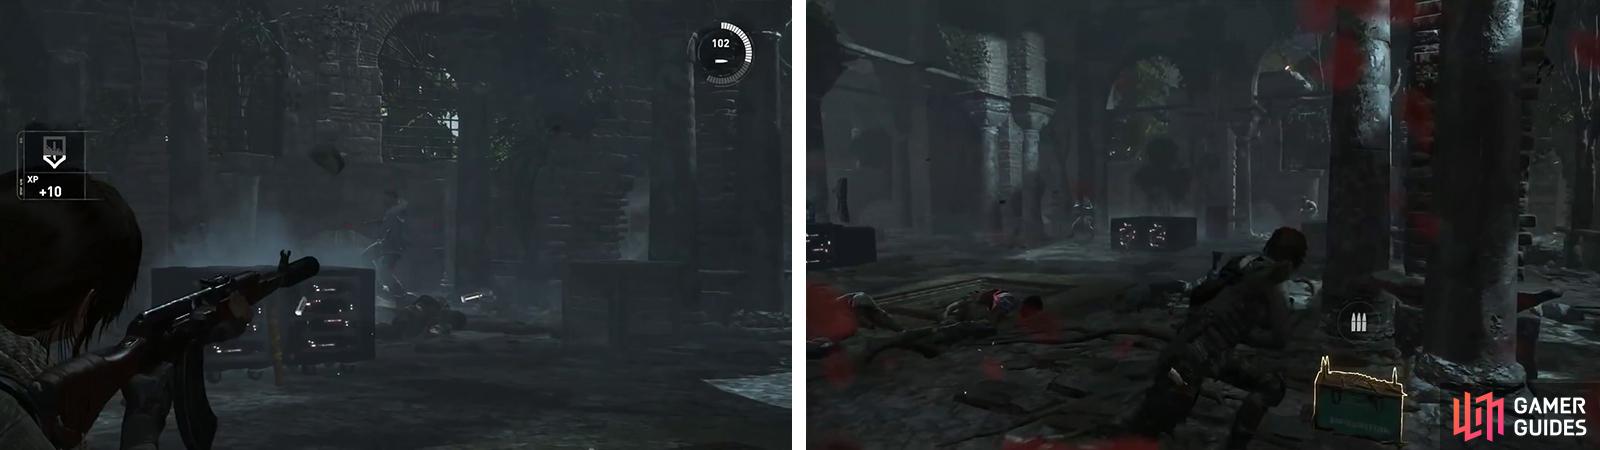 In the final room, you’ll be able to attack three enemies first (left) before waves of enemies will stream into the room (right).